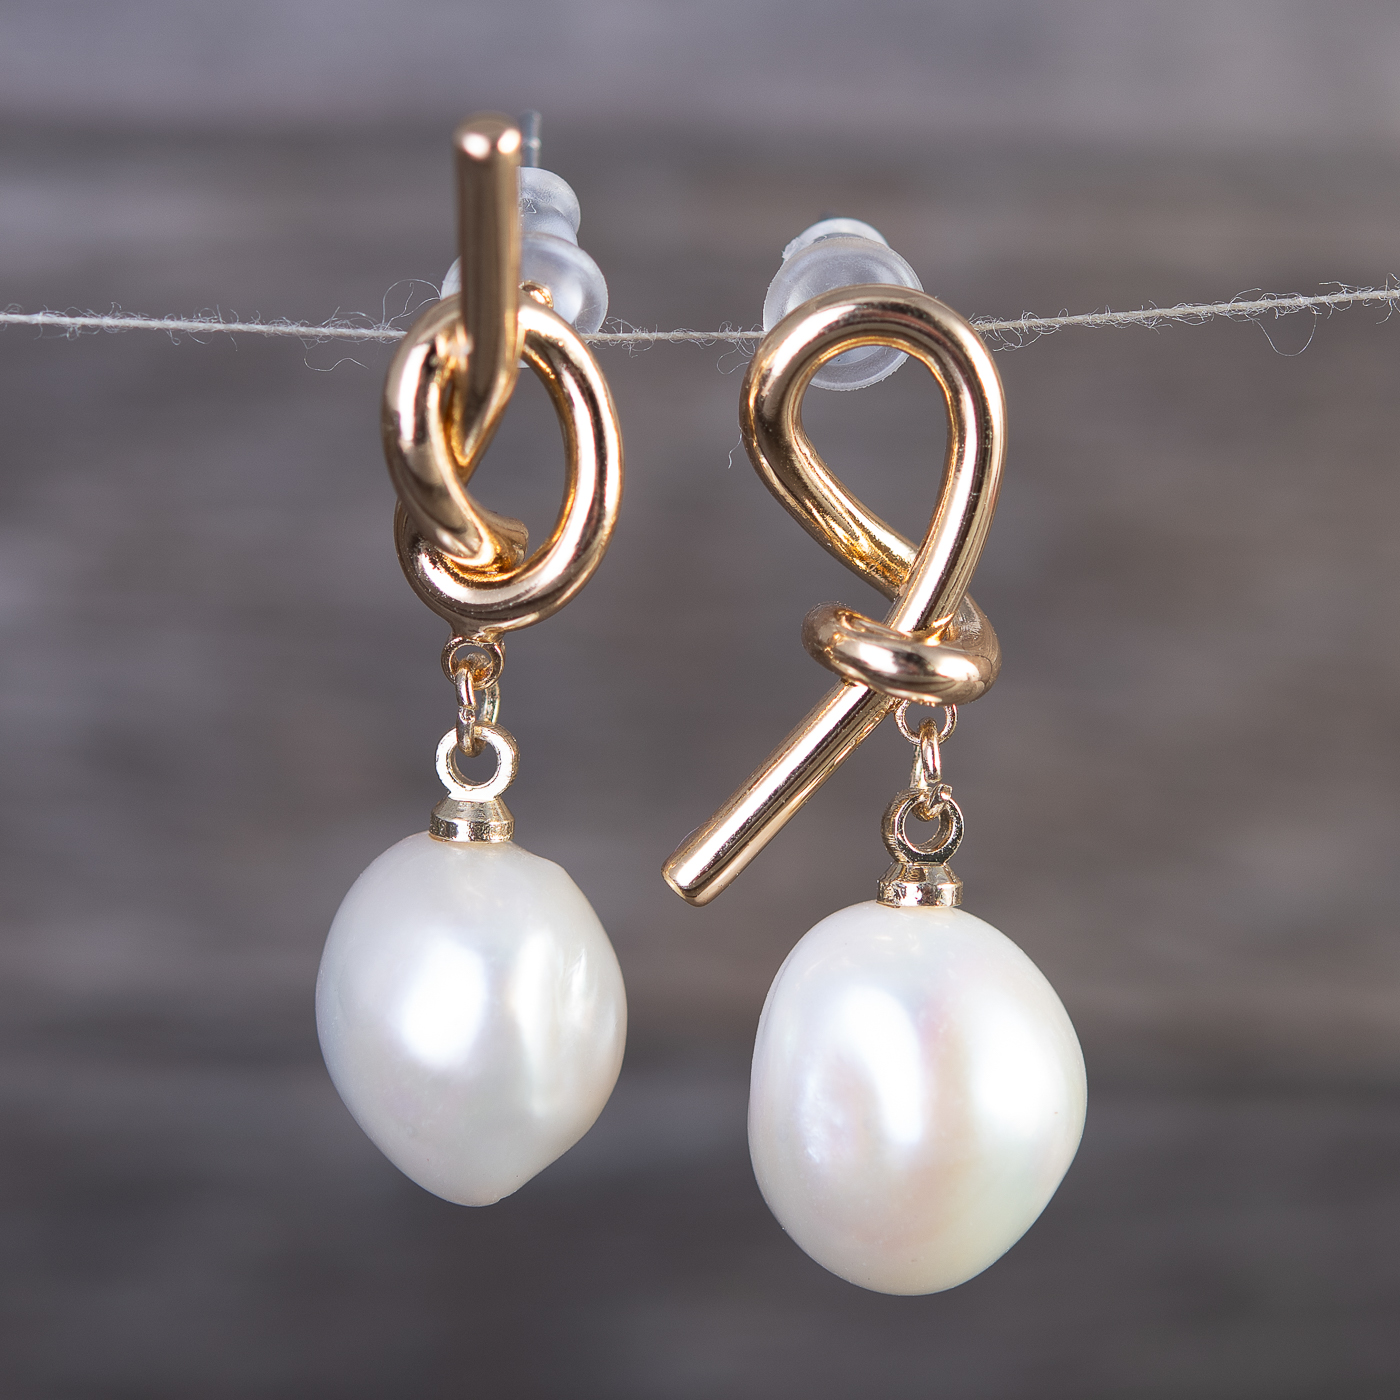 Knotted Pearl Drop Earrings - Gold ⋆ Amanda Blu and Company